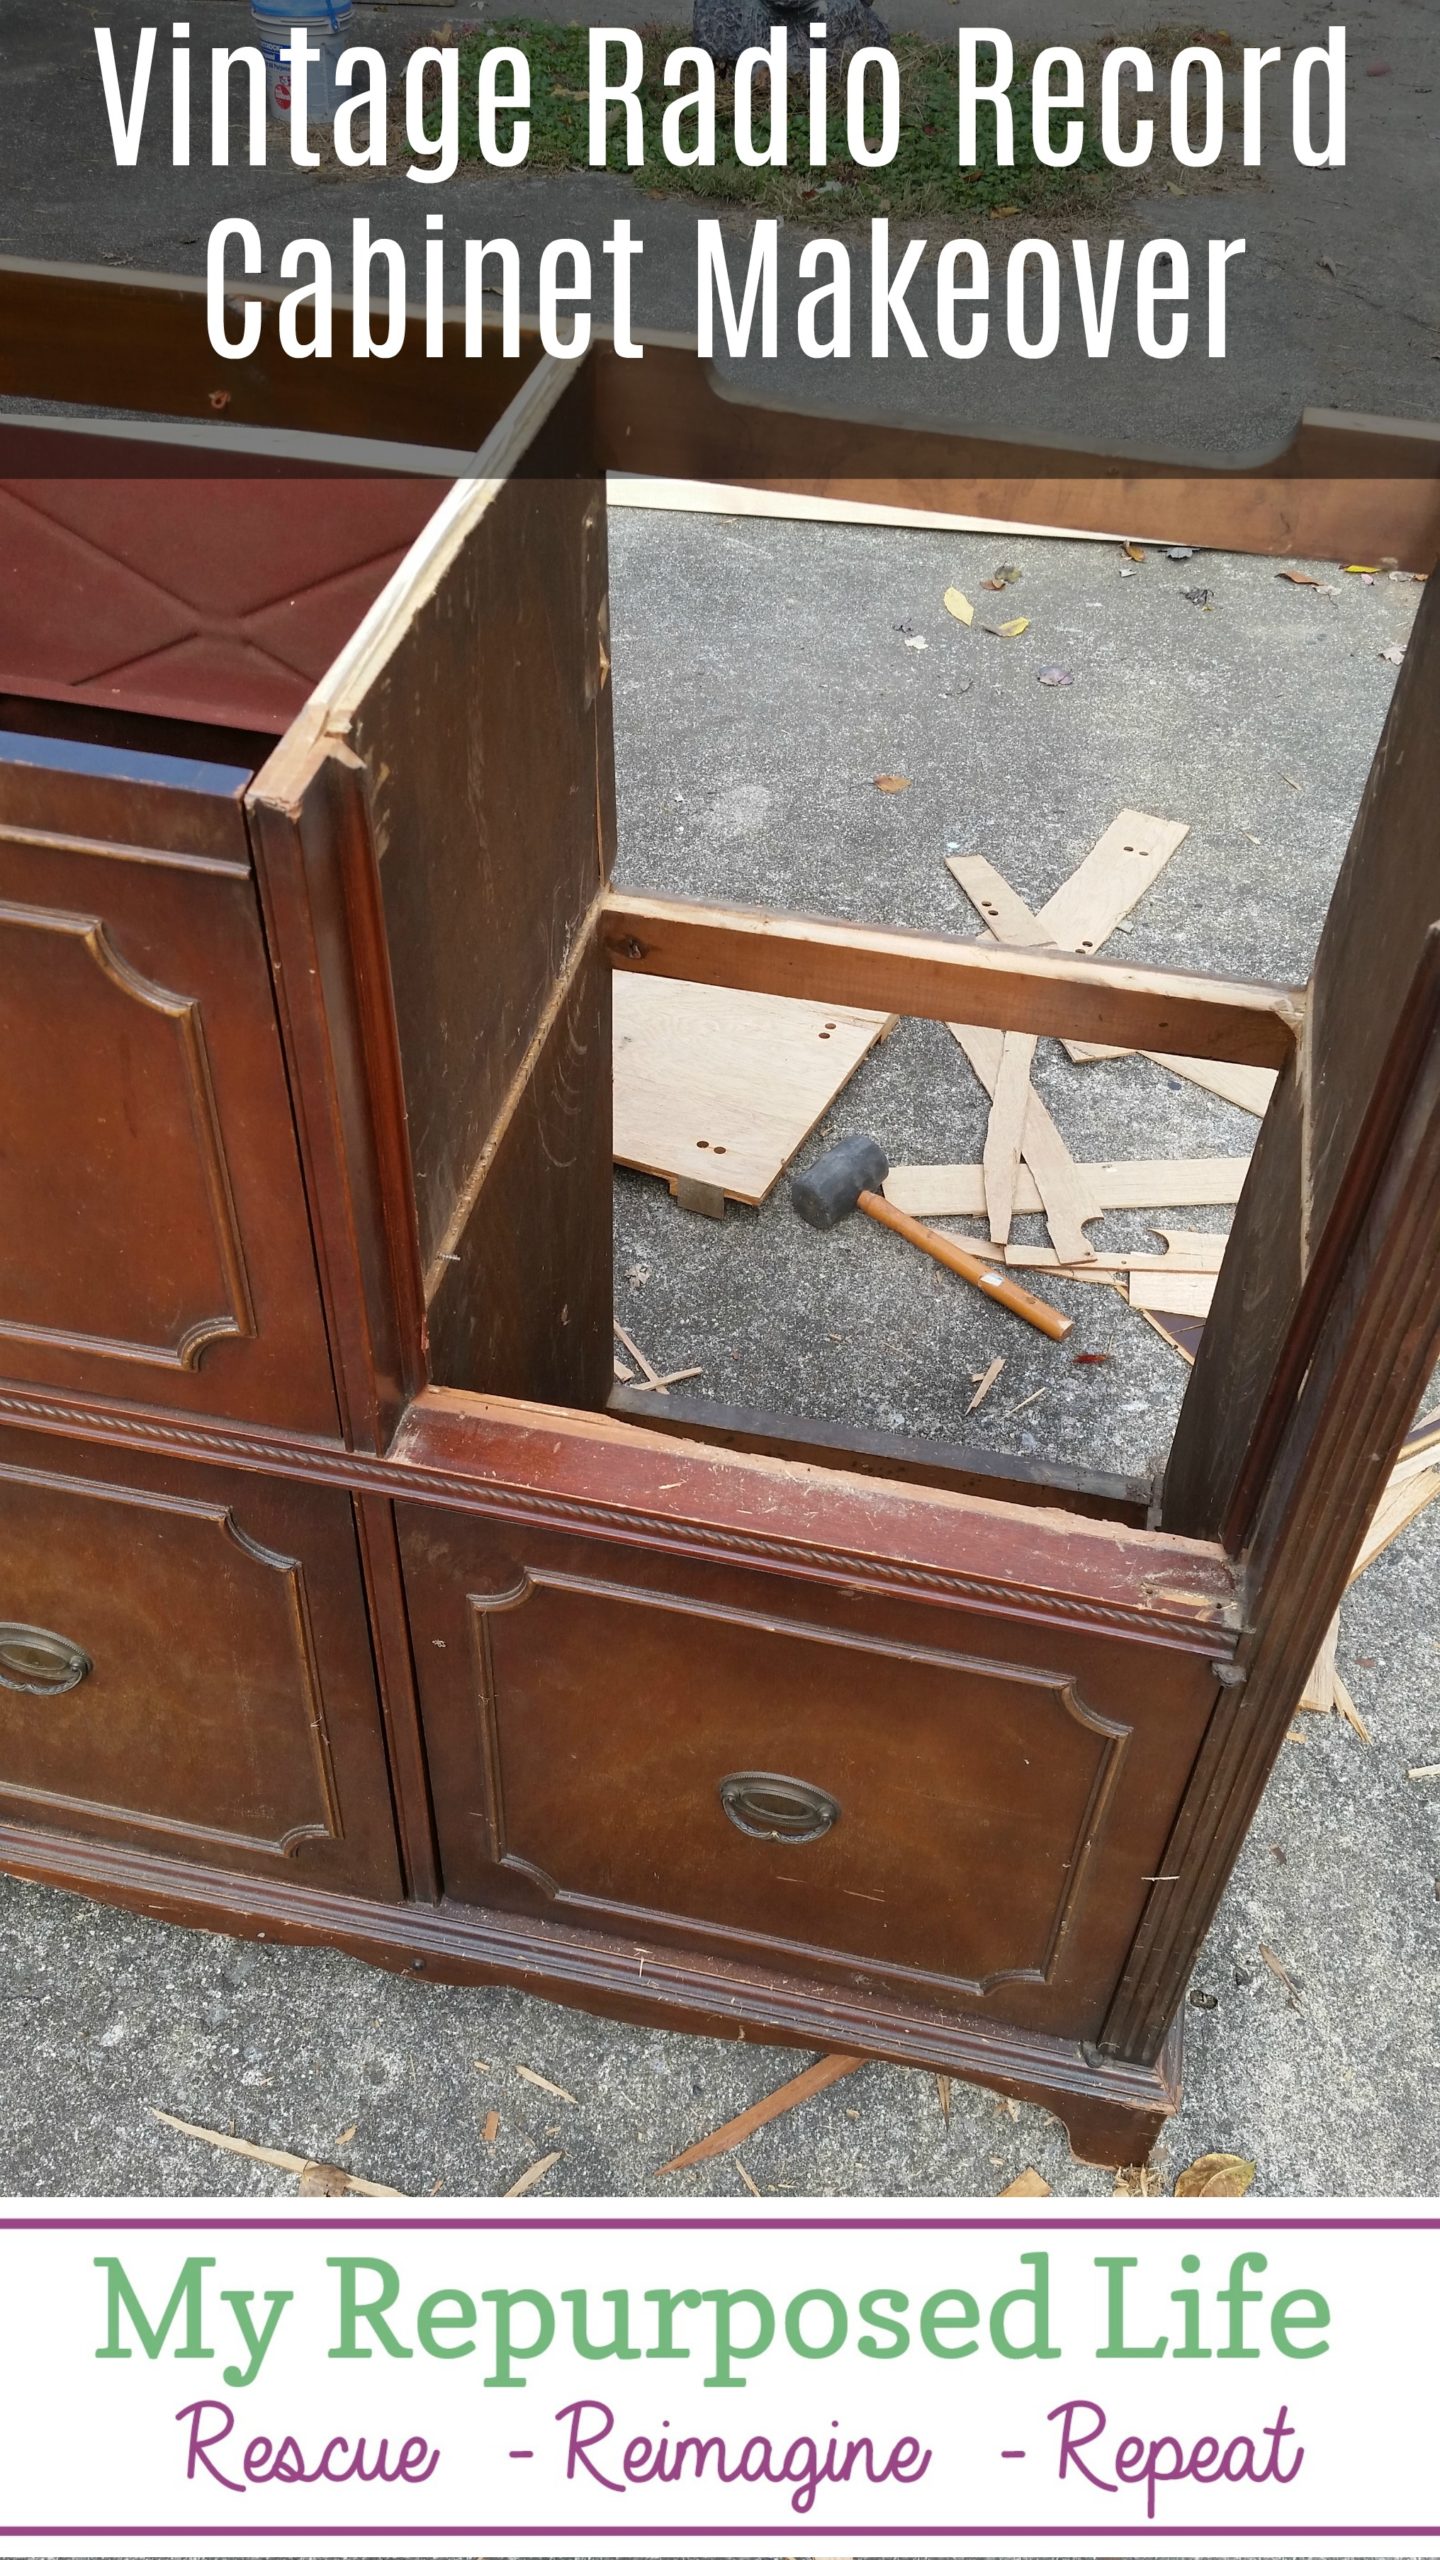 This makeover was years in the making, and isn't quite finished yet. Save it so you can come back to see how it turns out. #MyRepurposedLife #repurposed #furniture #record #radio #cabinet #makeover via @repurposedlife